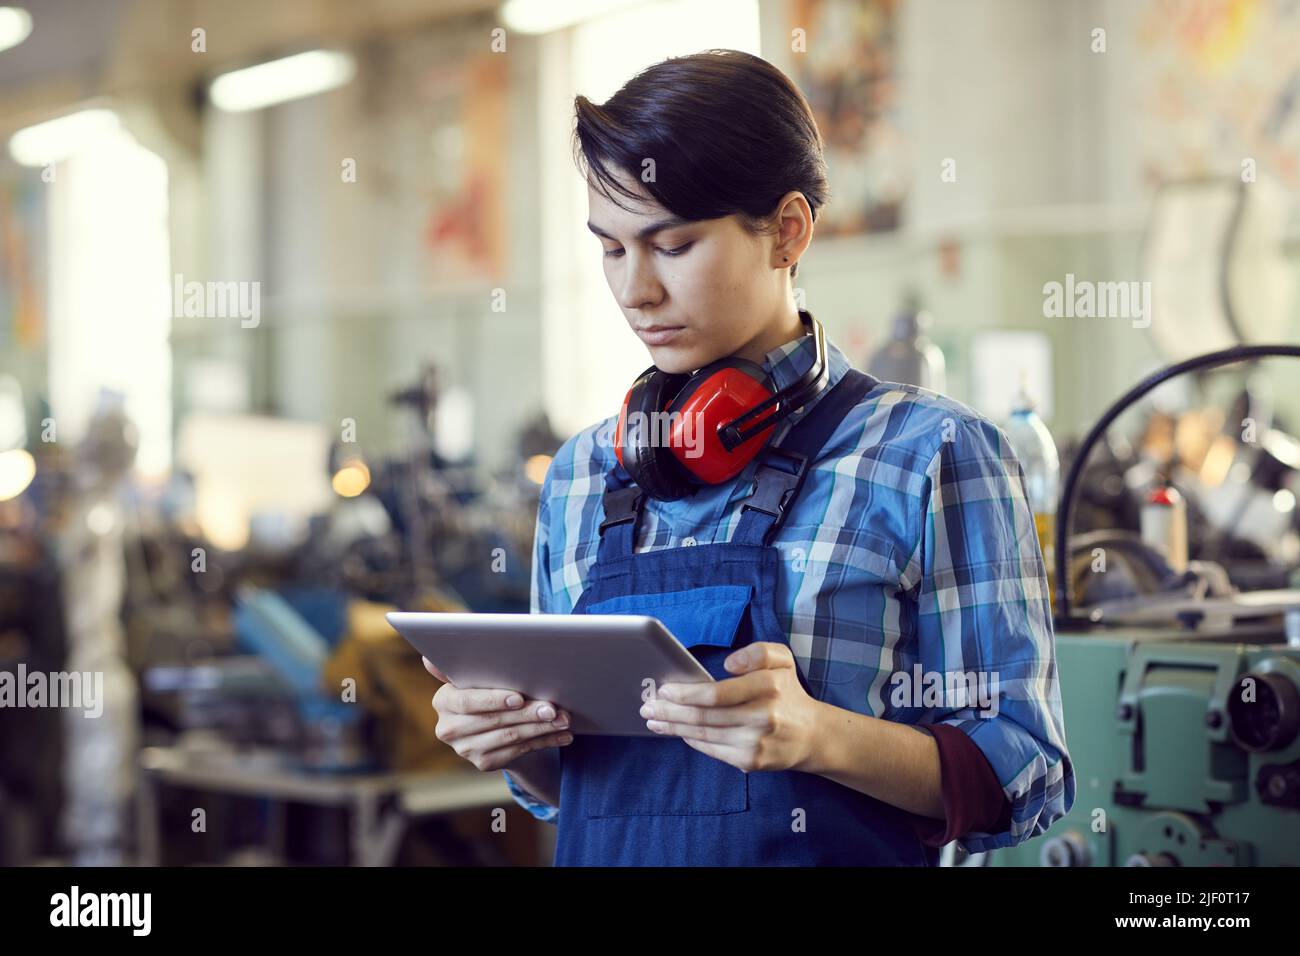 Serious busy female factory engineer with short black hair standing in workshop and using tablet for lathe examination Stock Photo